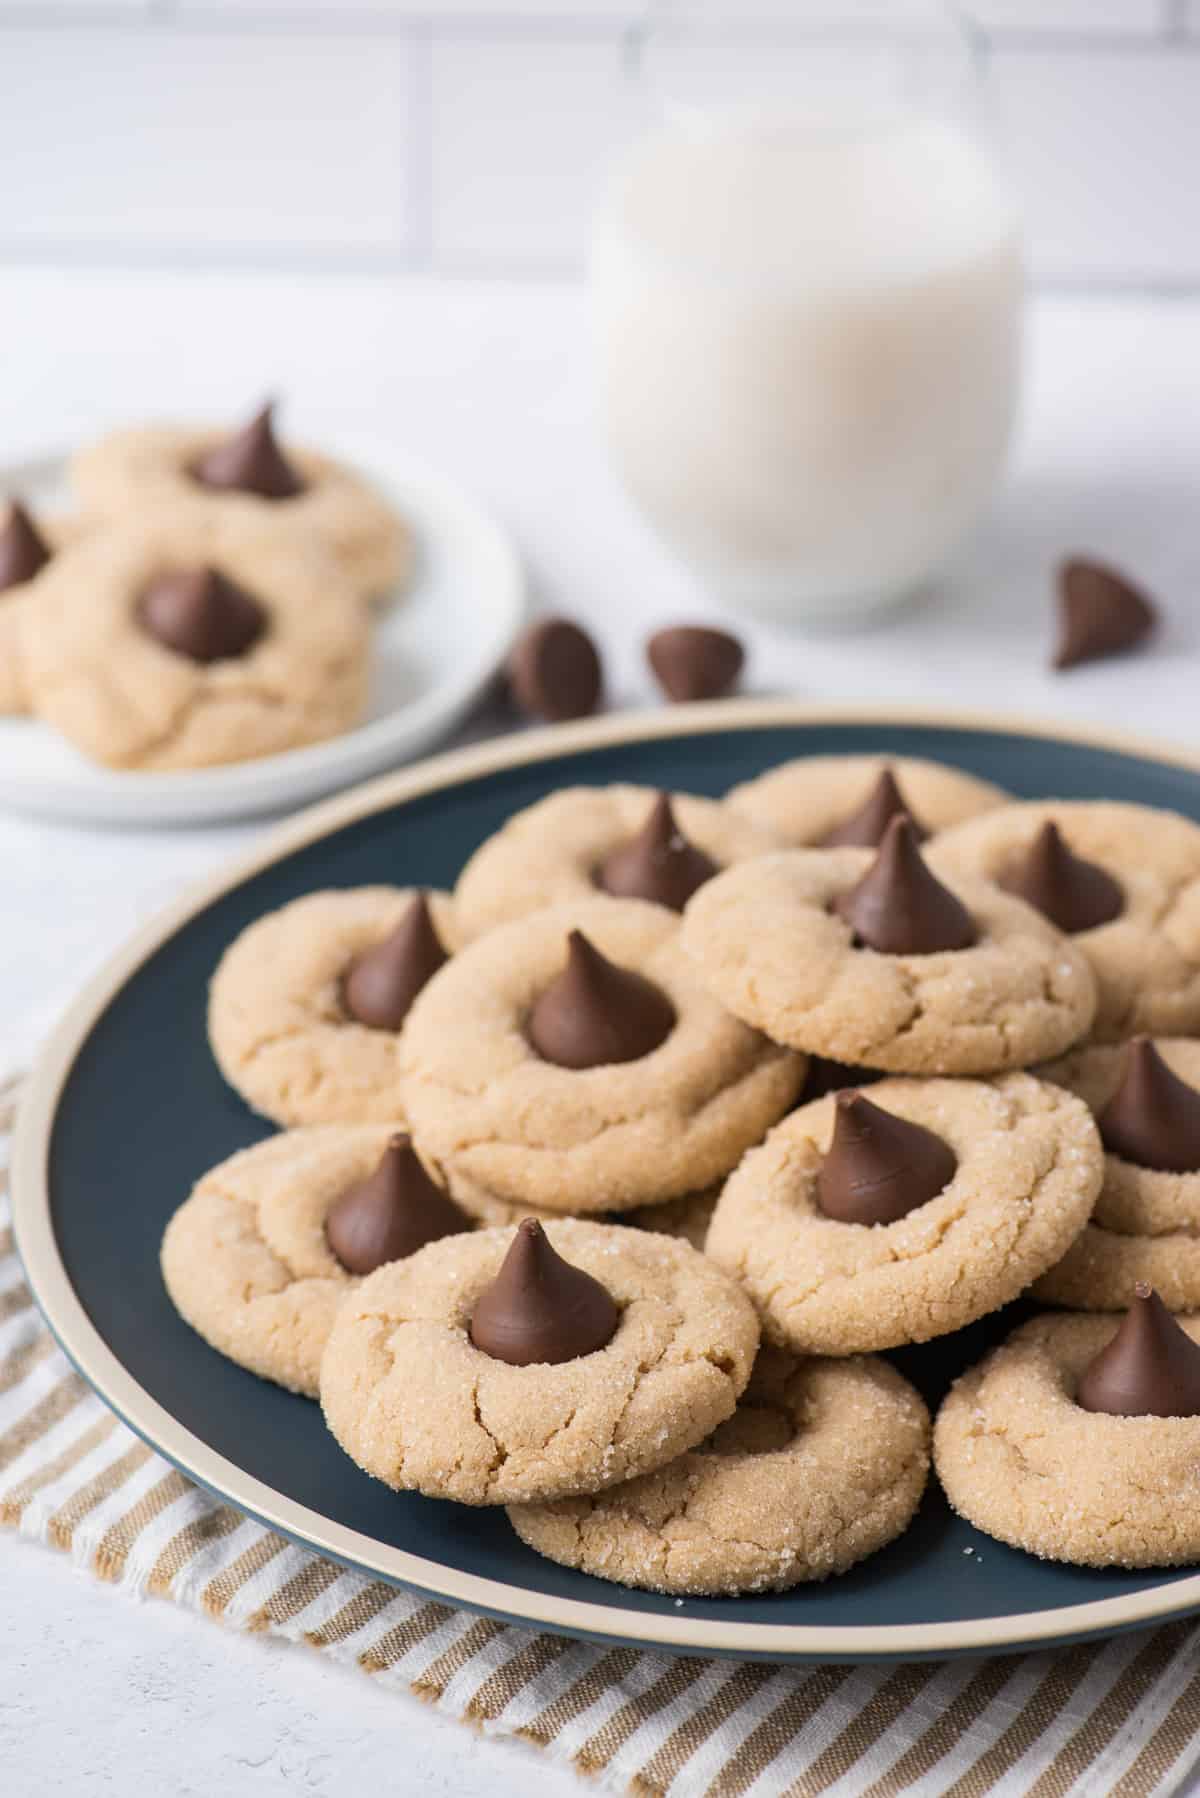 hershey kiss cookies on a blue plate with glass of milk in the background